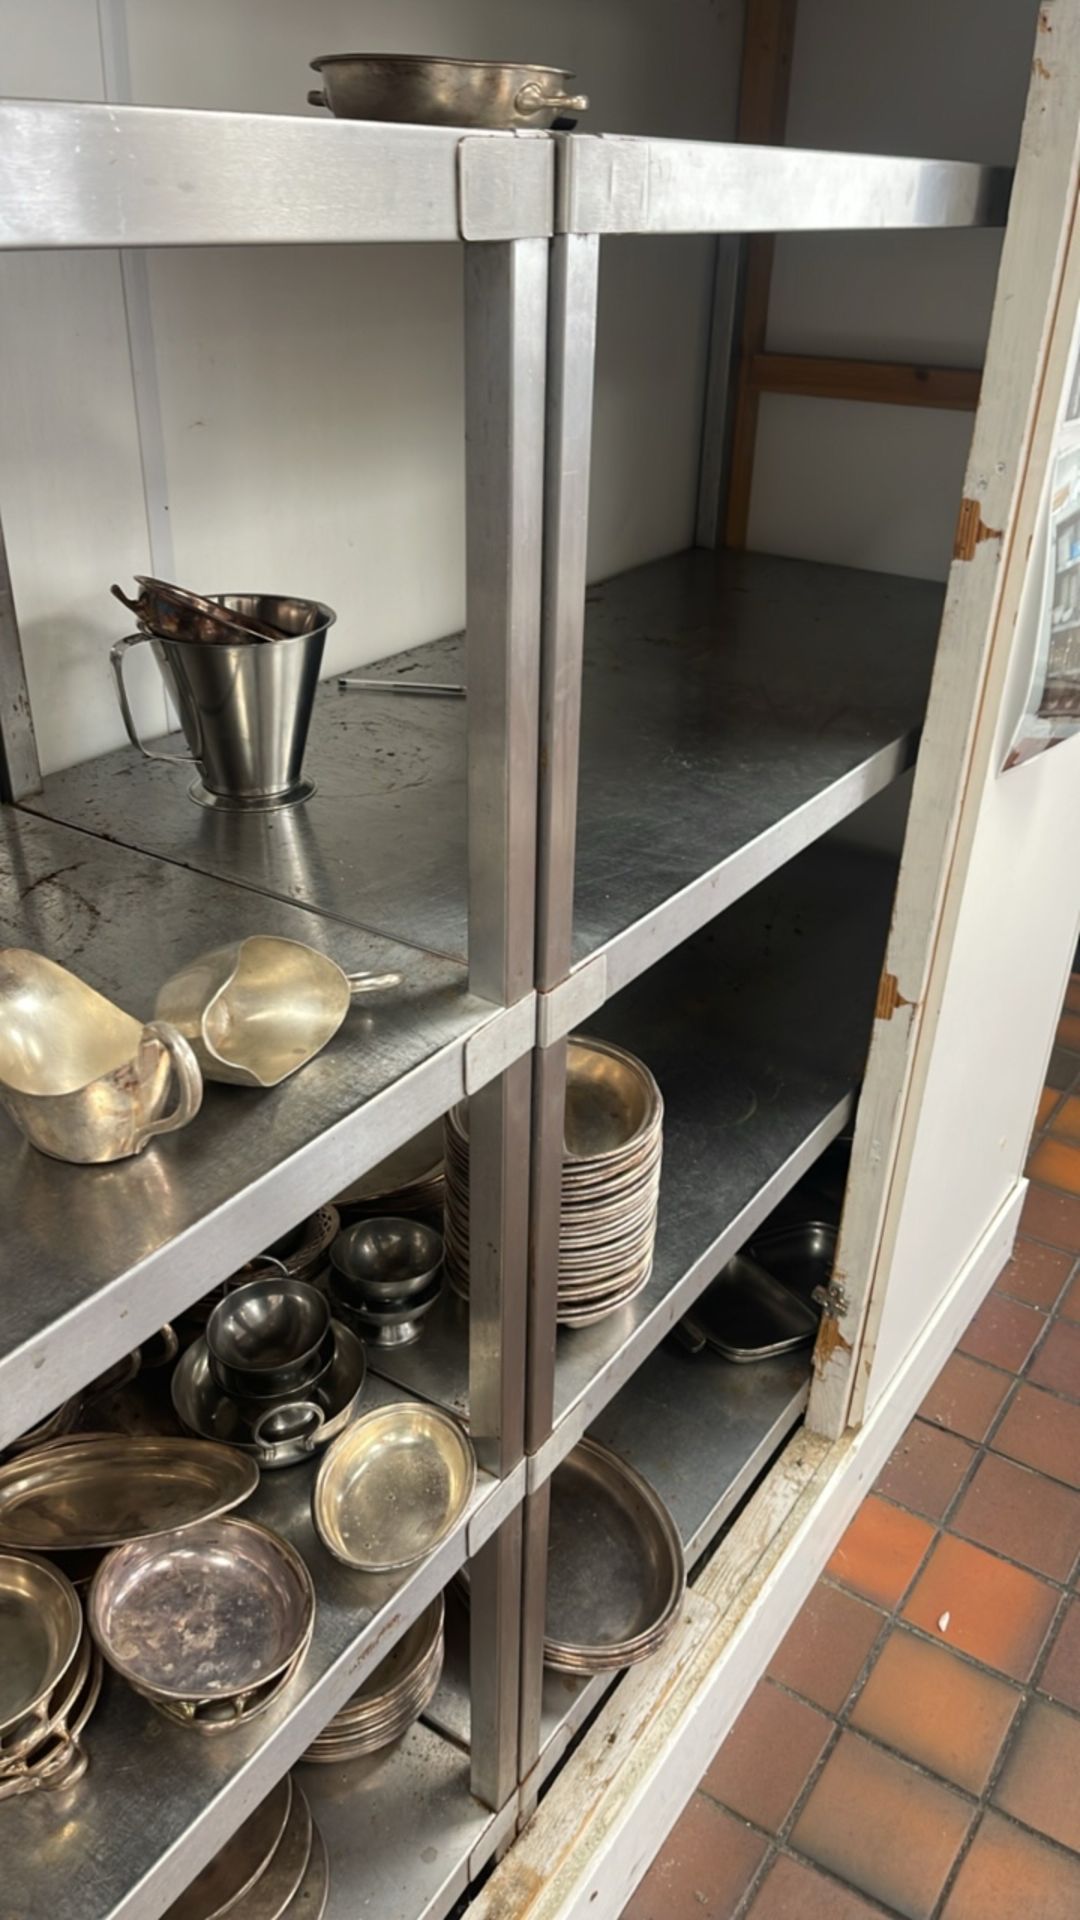 2 x Stainless Steel Shelf Units - Image 3 of 7